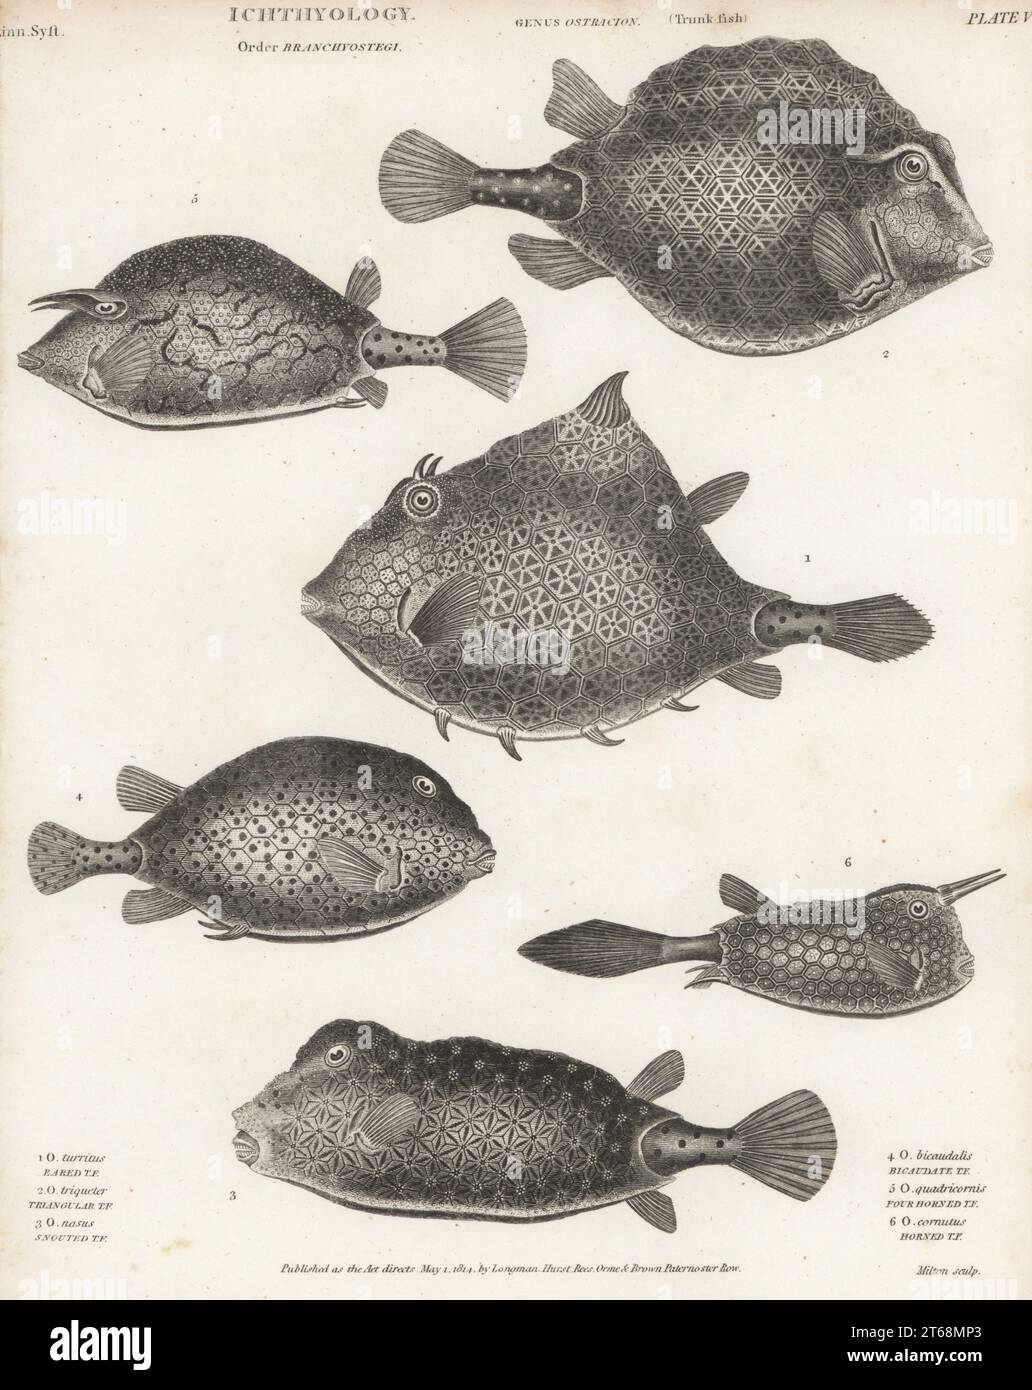 Humpback turretfish, Tetrosomus gibbosus 1, smooth trunkfish, Lactophrys triqueter 2, shortnose boxfish, Rhynchostracion nasus 3, spotted trunkfish, Lactophrys bicaudalis 4, scrawled cowfish, Acanthostracion quadricornis 5, and longhorn cowfish, Lactoria cornuta 6. Copperplate engraving by Thomas Milton from Abraham Rees' Cyclopedia or Universal Dictionary of Arts, Sciences and Literature, Longman, Hurst, Rees, Orme and Brown, Paternoster Row, London, May 1, 1814. Stock Photo